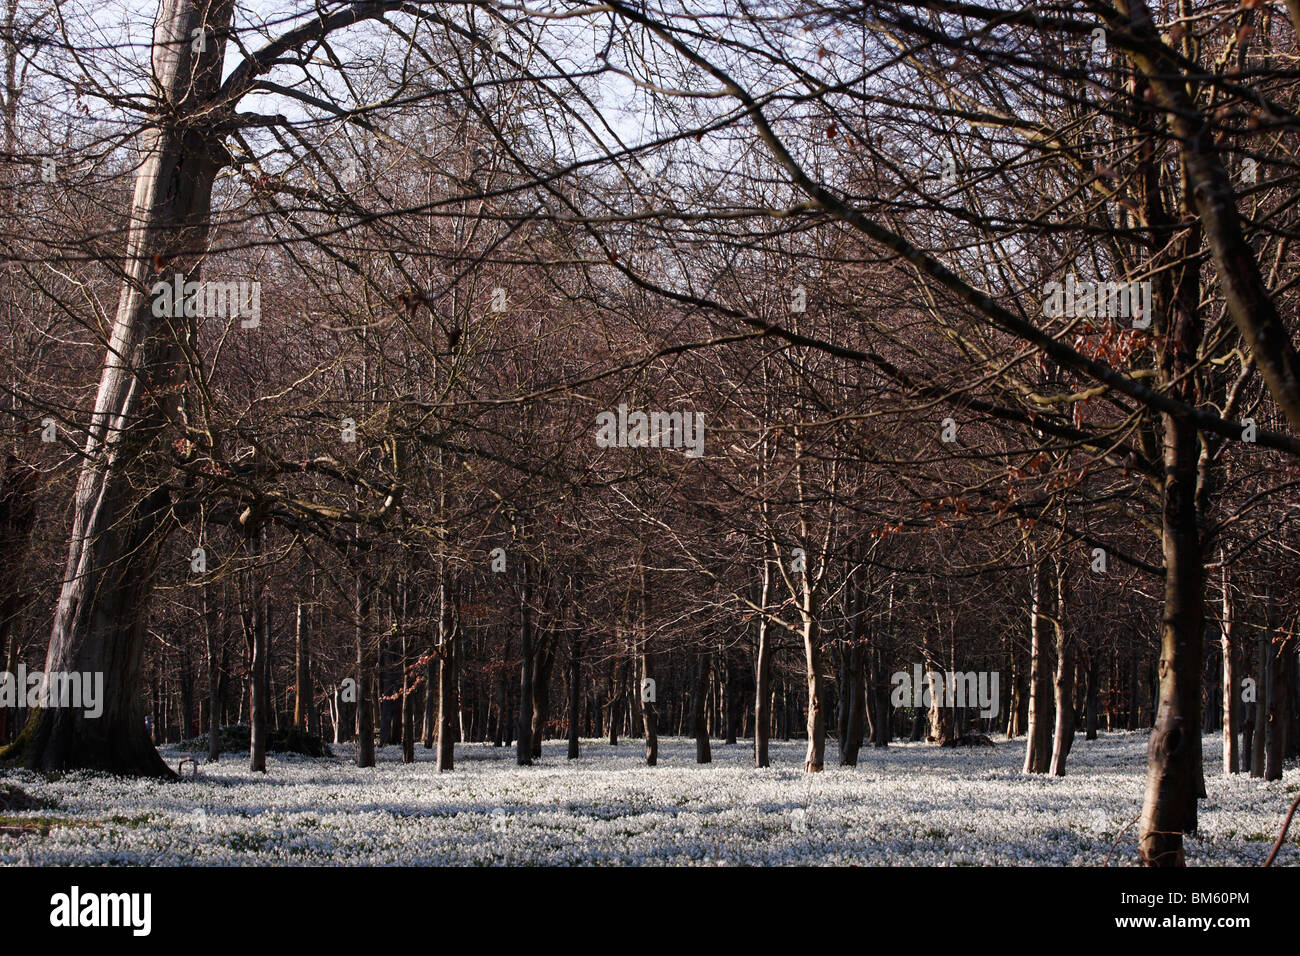 Snowdrops and beech wood, [Welford Park], Berkshire, England, UK Stock Photo